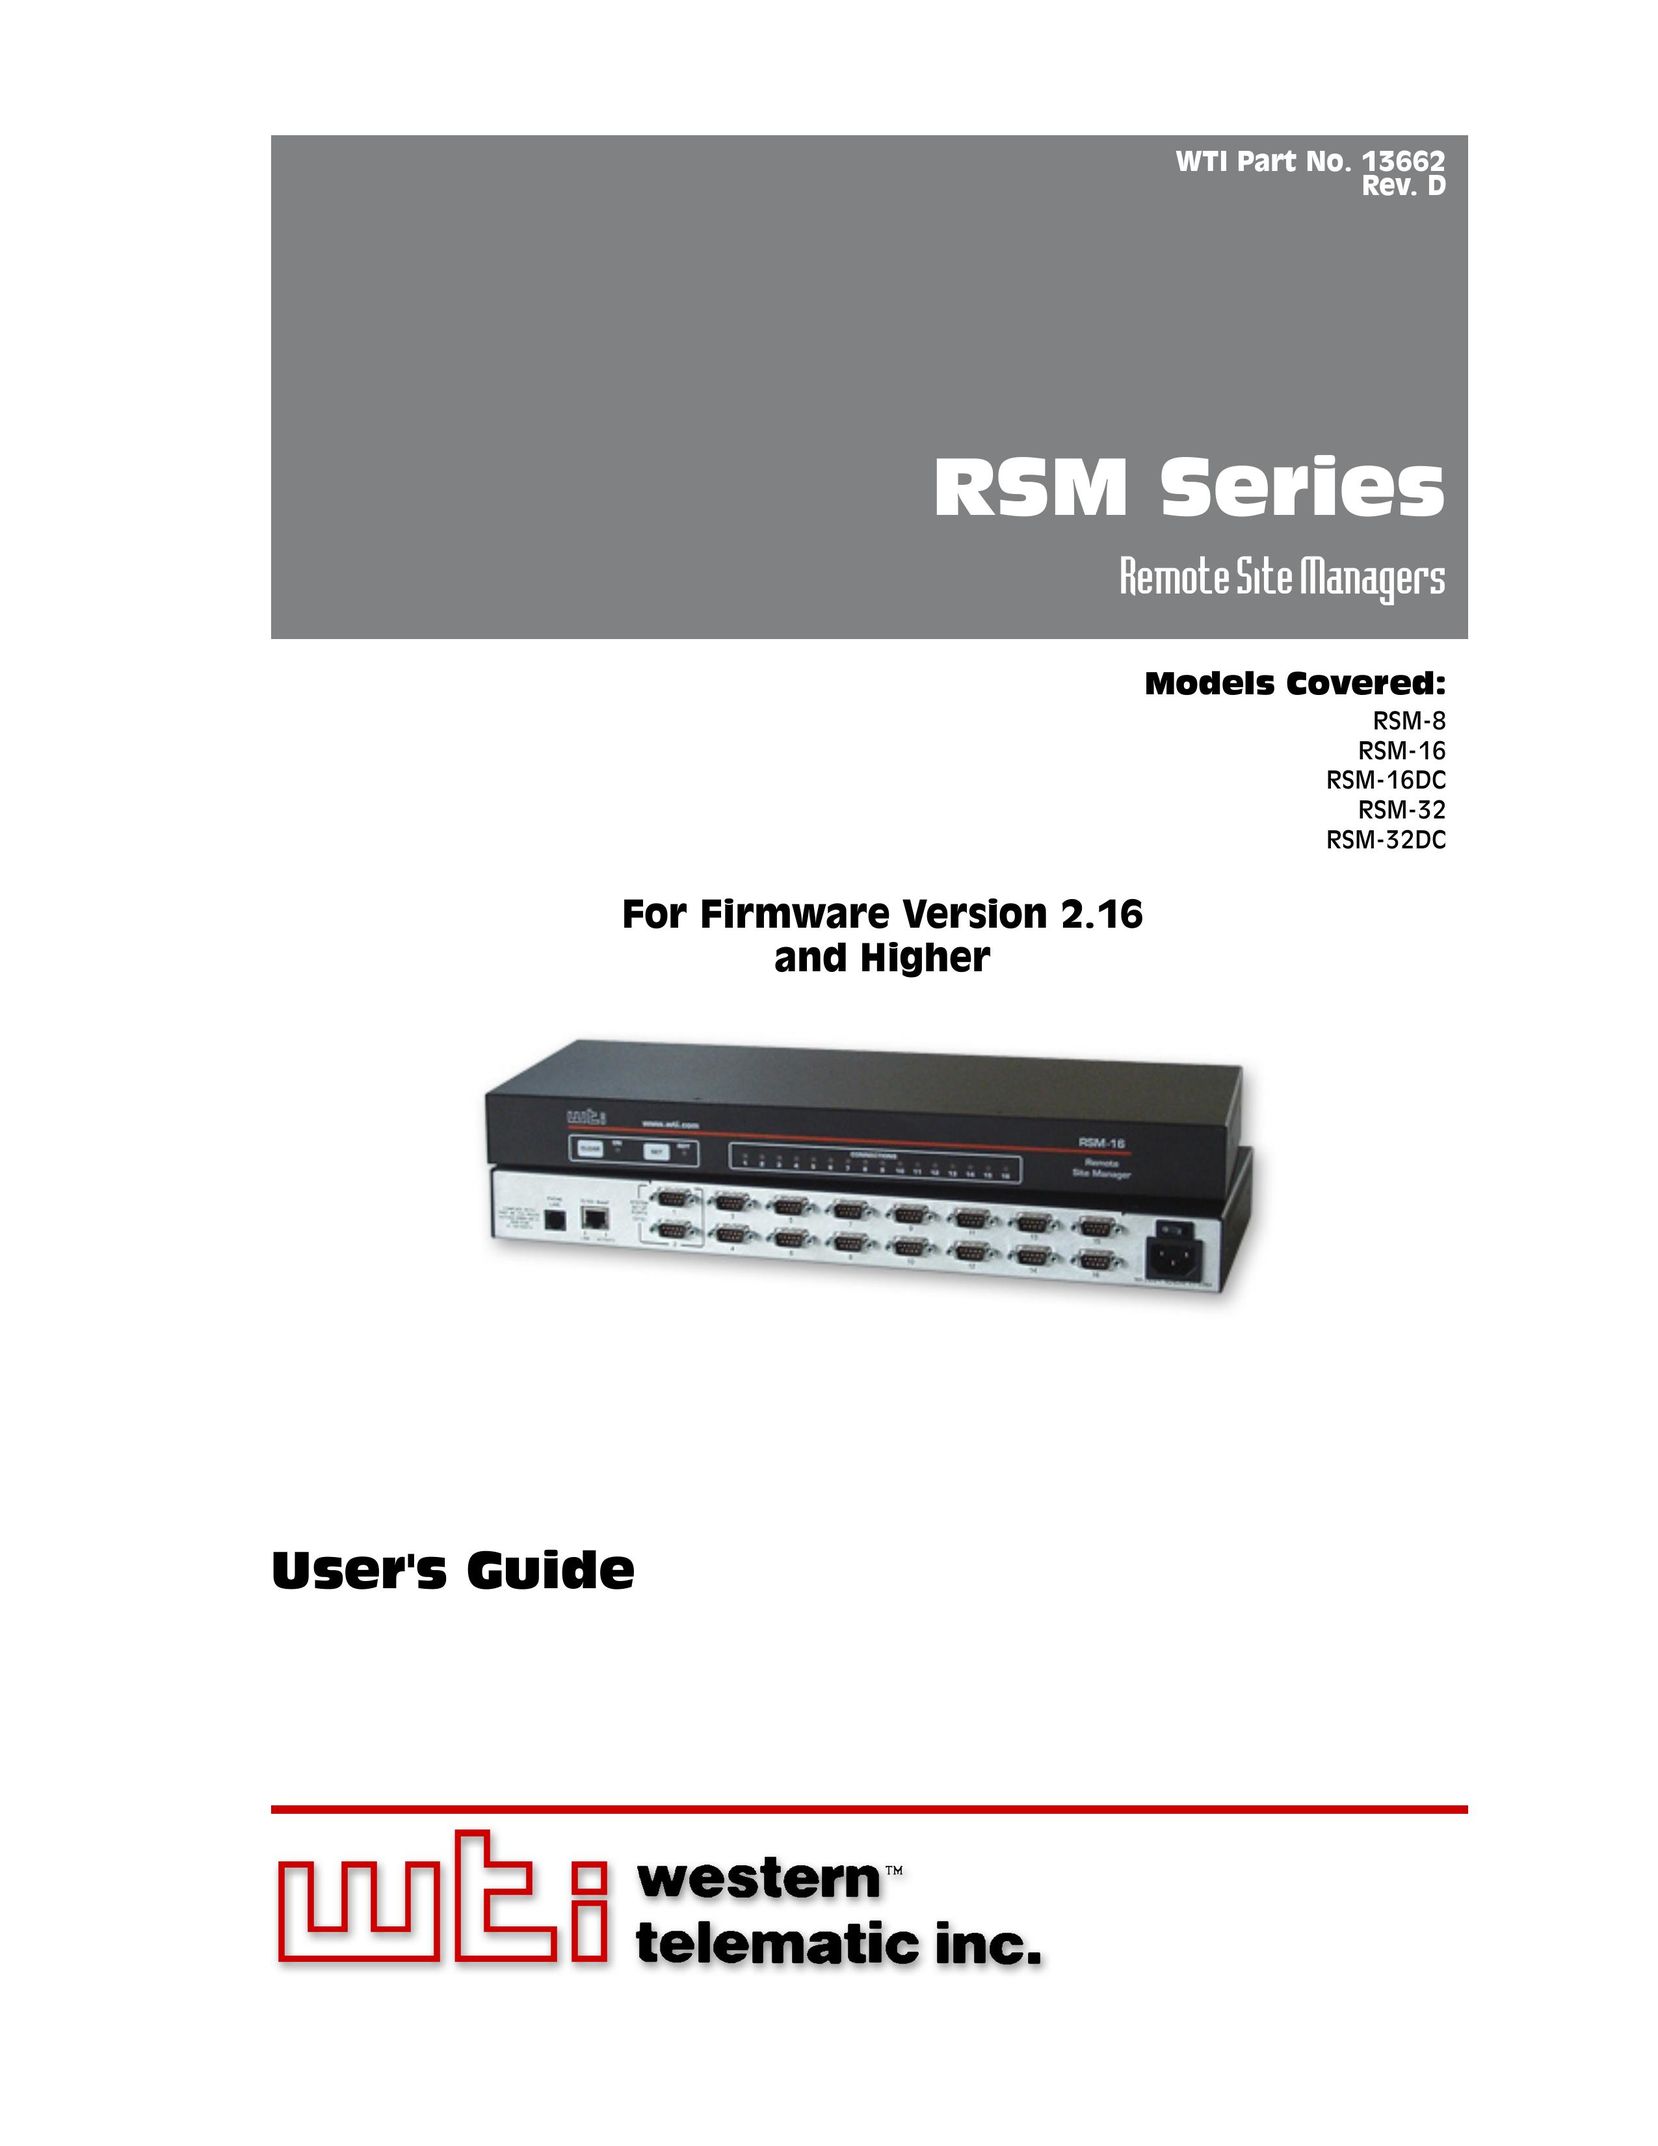 Western Telematic RSM-16DC Video Gaming Accessories User Manual